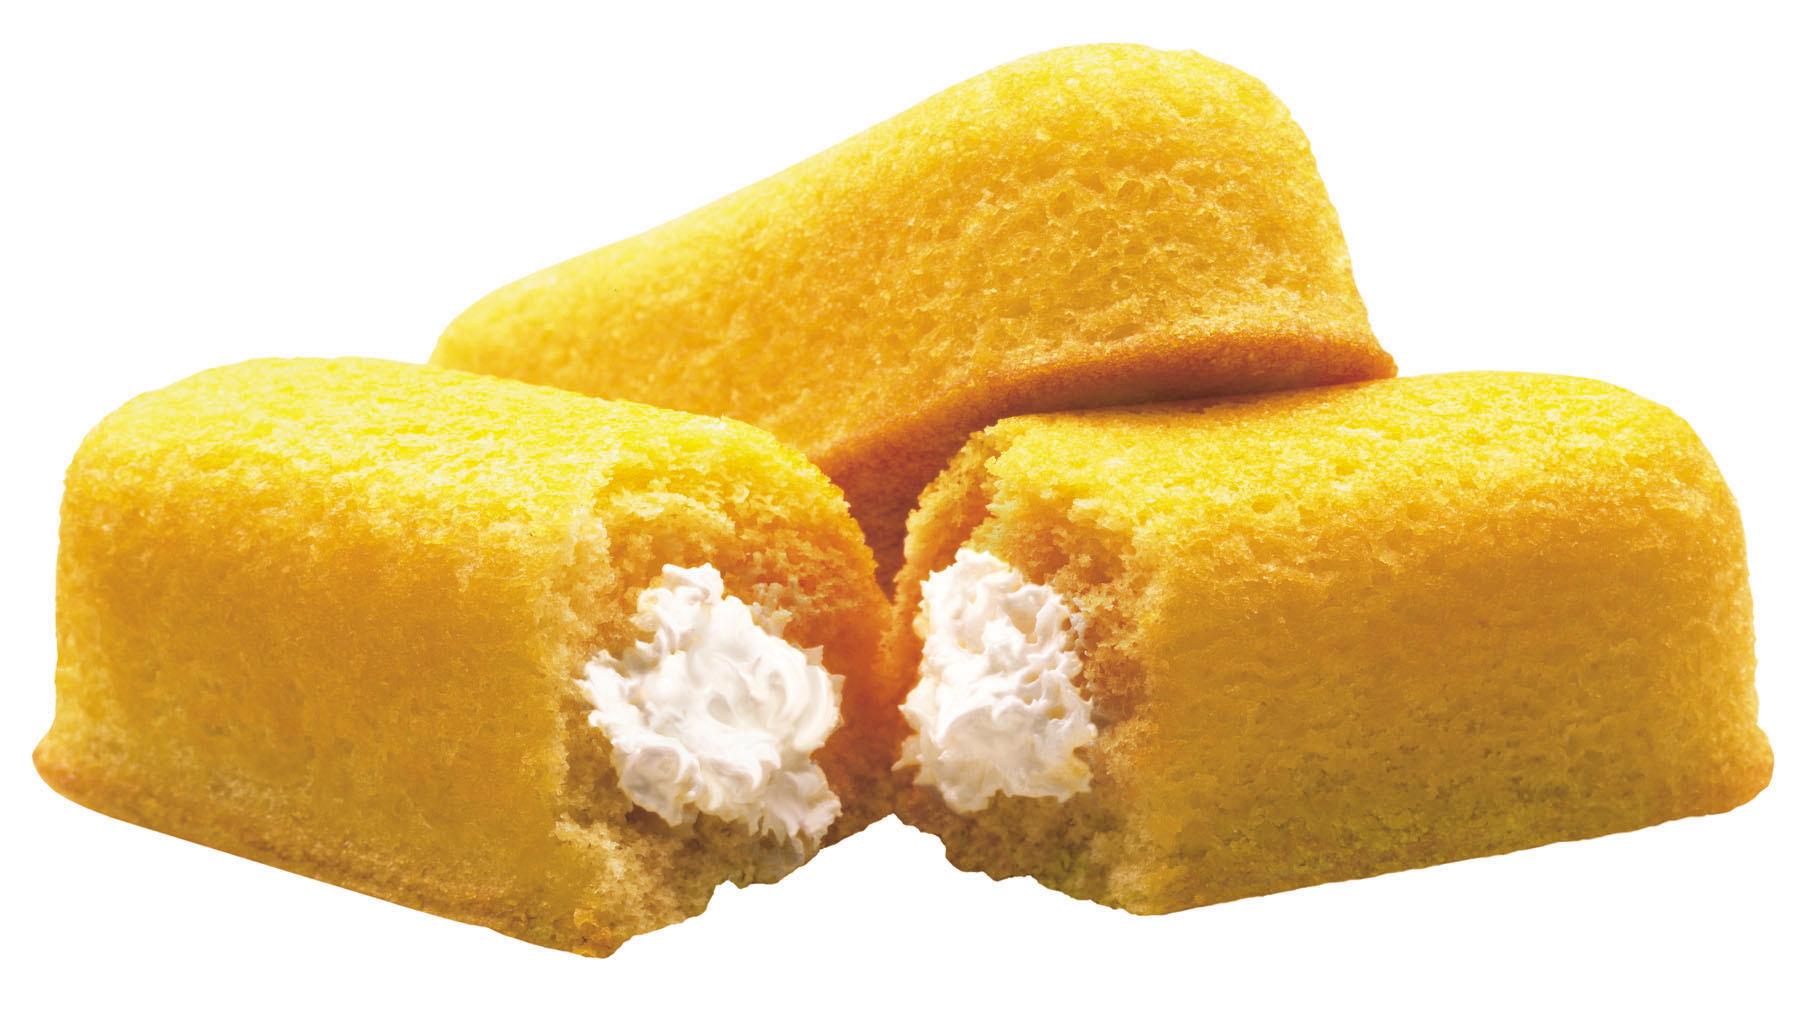 Twinkies cream-filled snack cakesfirst came onto the scene in 1930 and contained real fruit until rationing during World War II led to the vanilla cream Twinkie.